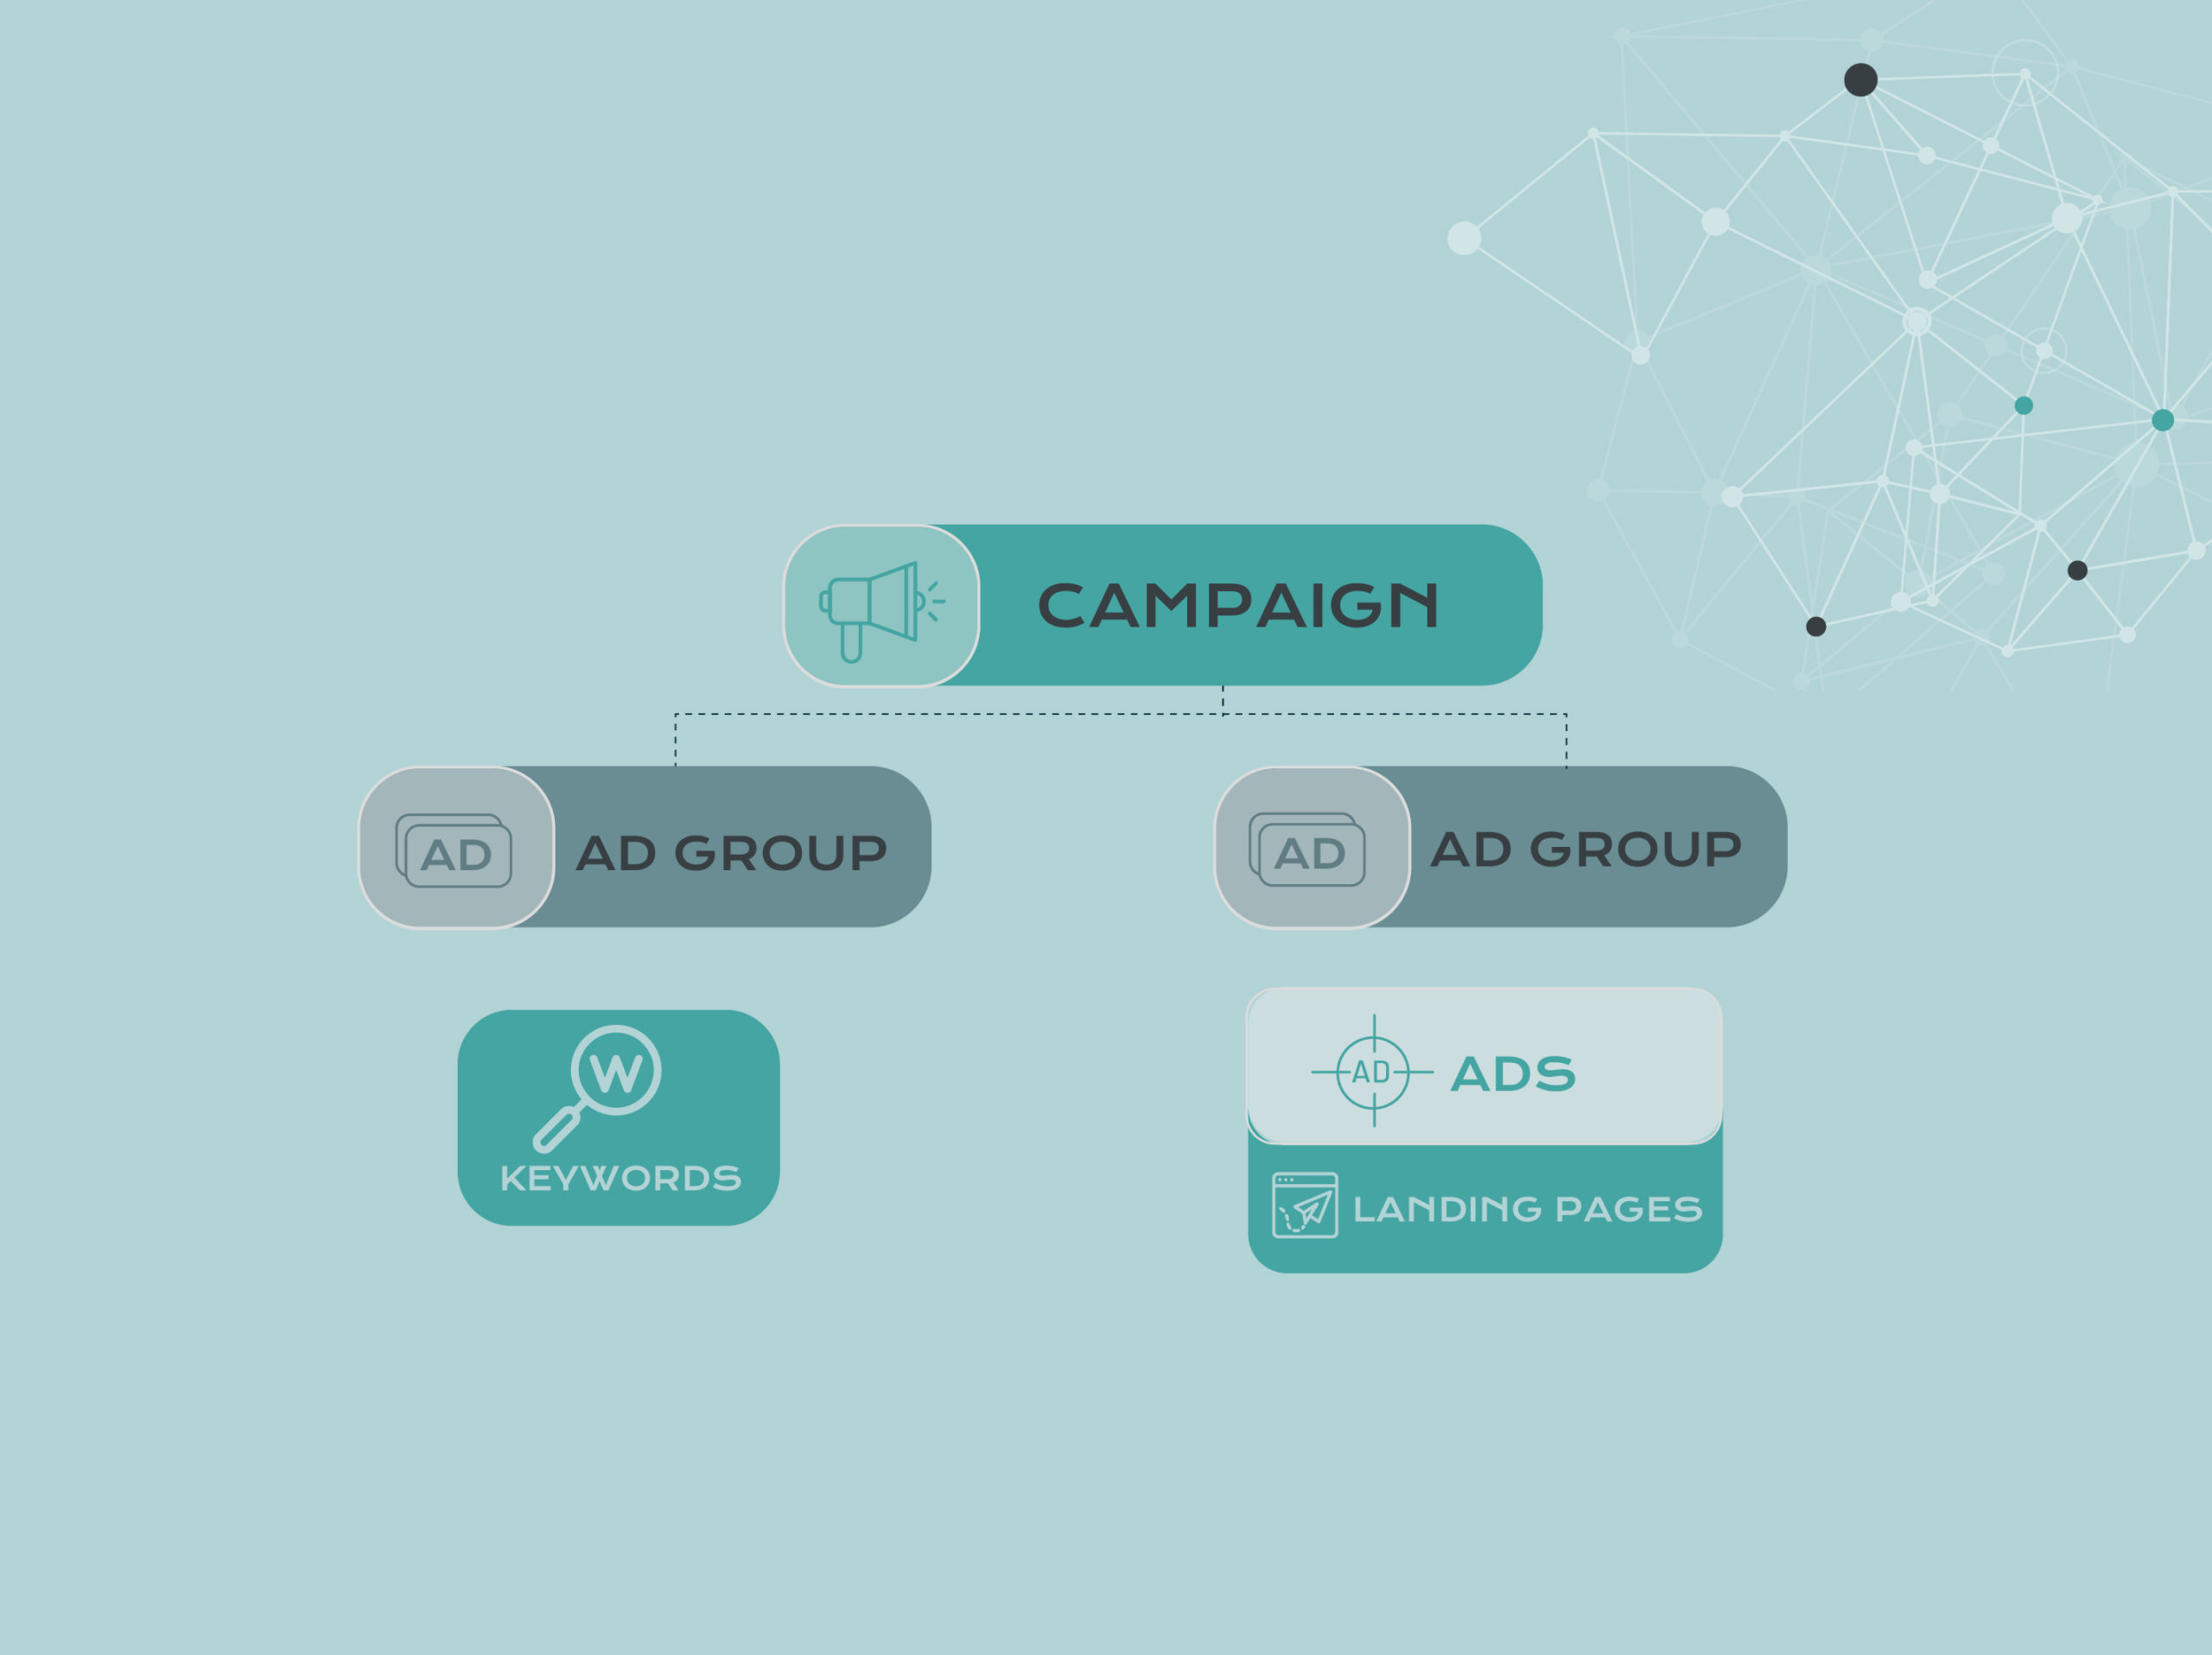 STAG vs SKAG and which is the best choice for your PPC campaign strategy.